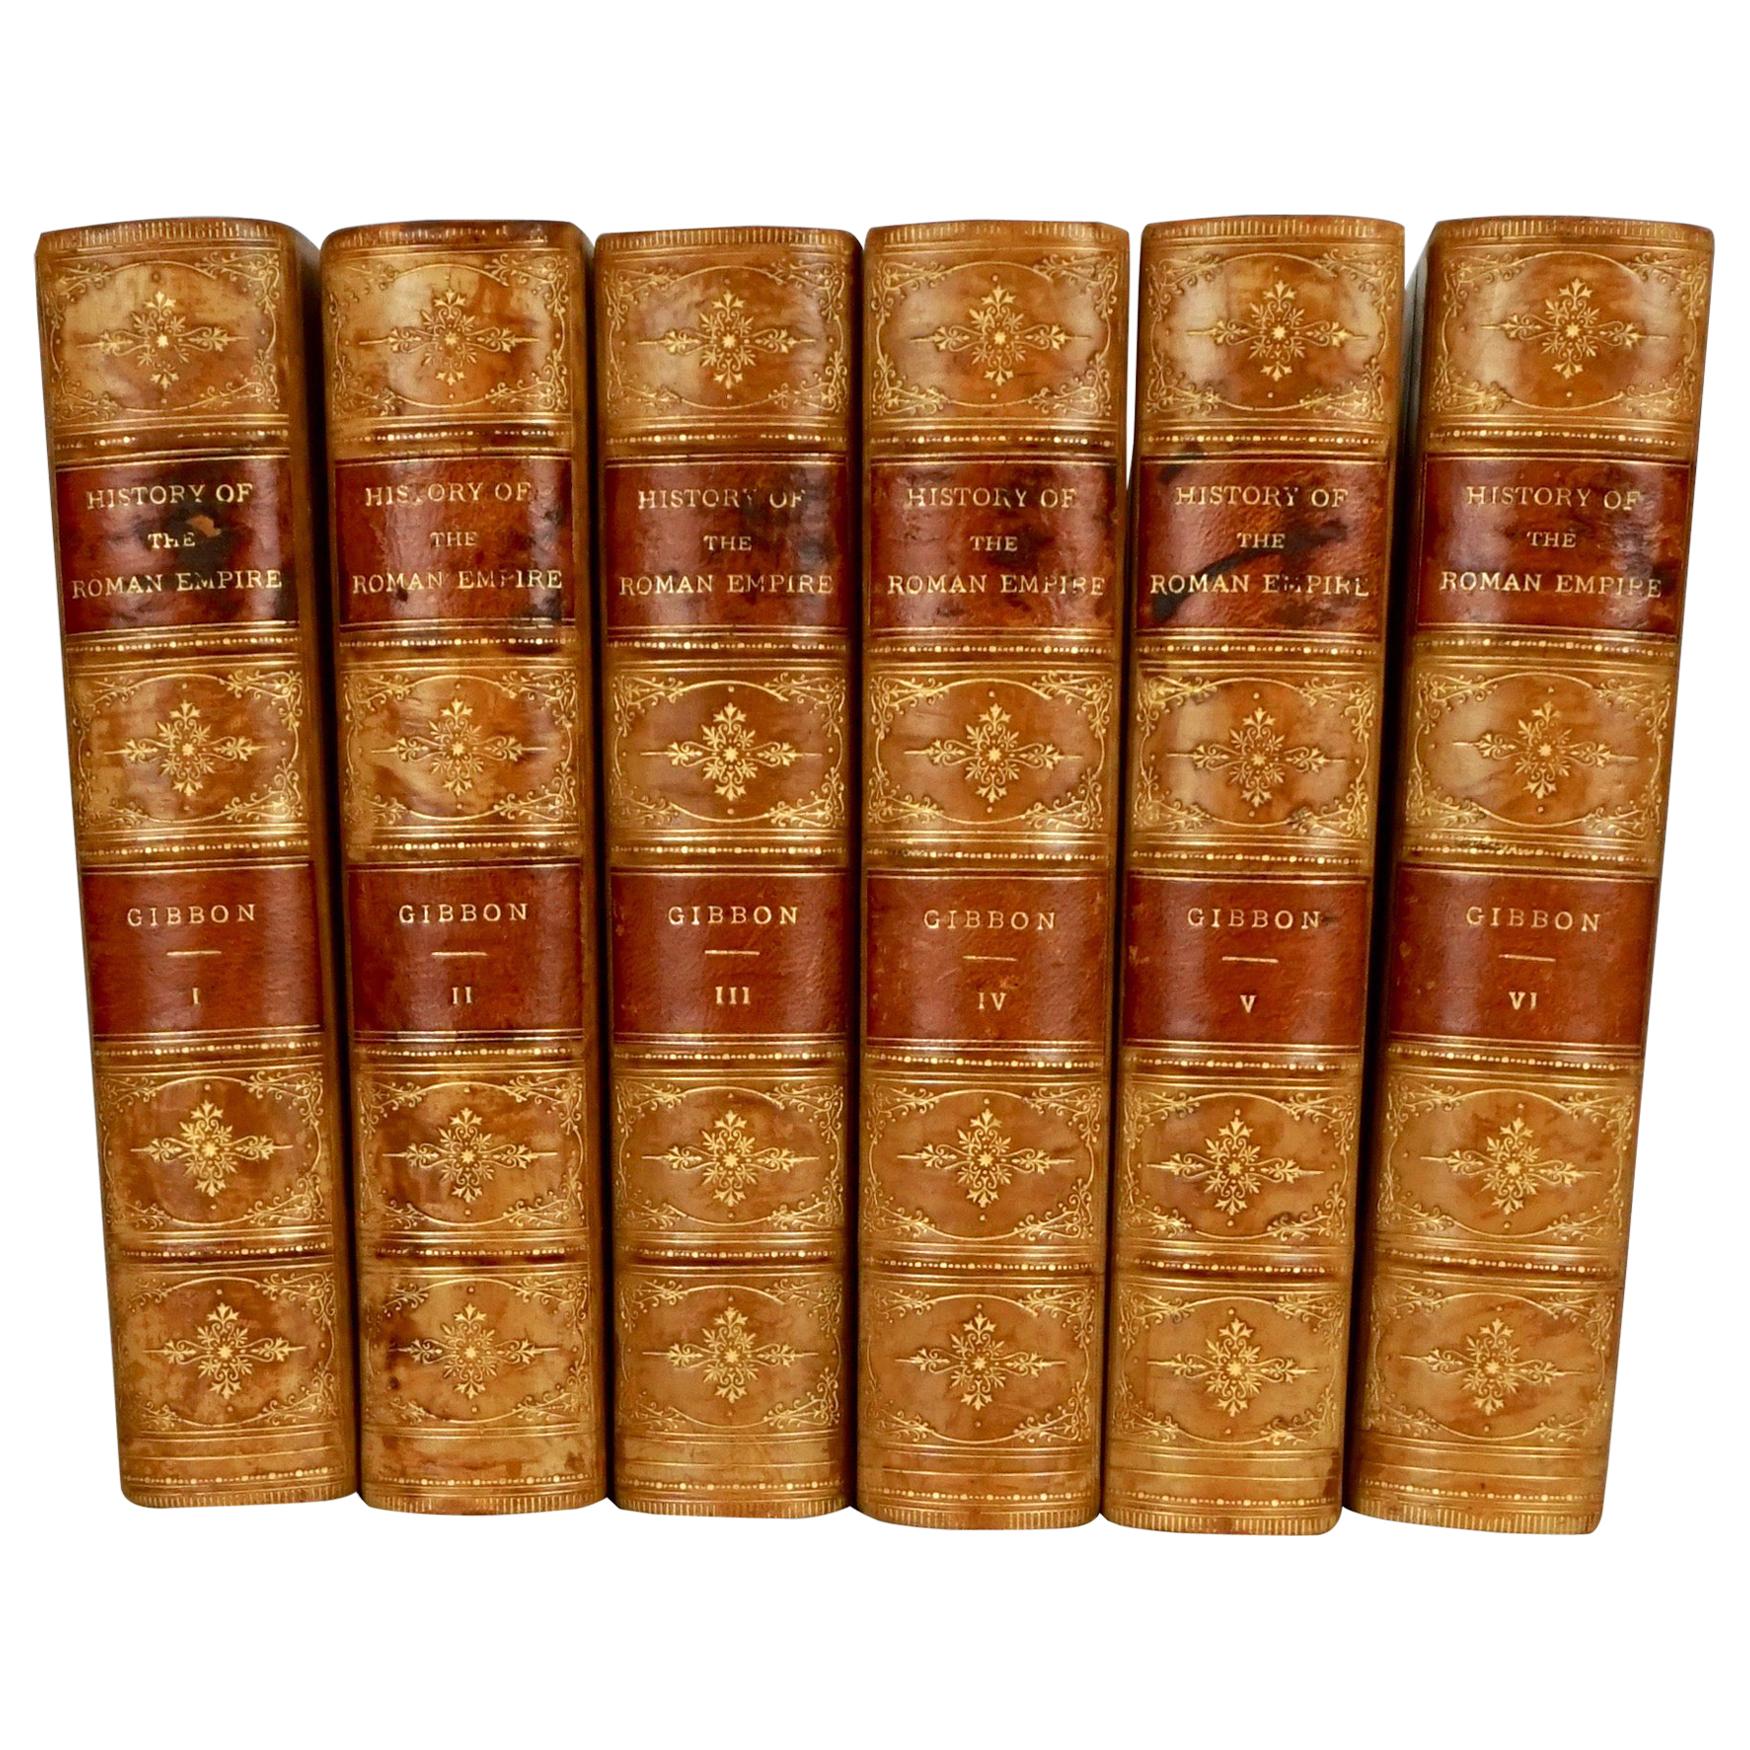 Leatherbound Set The Decline and Fall of the Roman Empire by Gibbons 6 Volumes